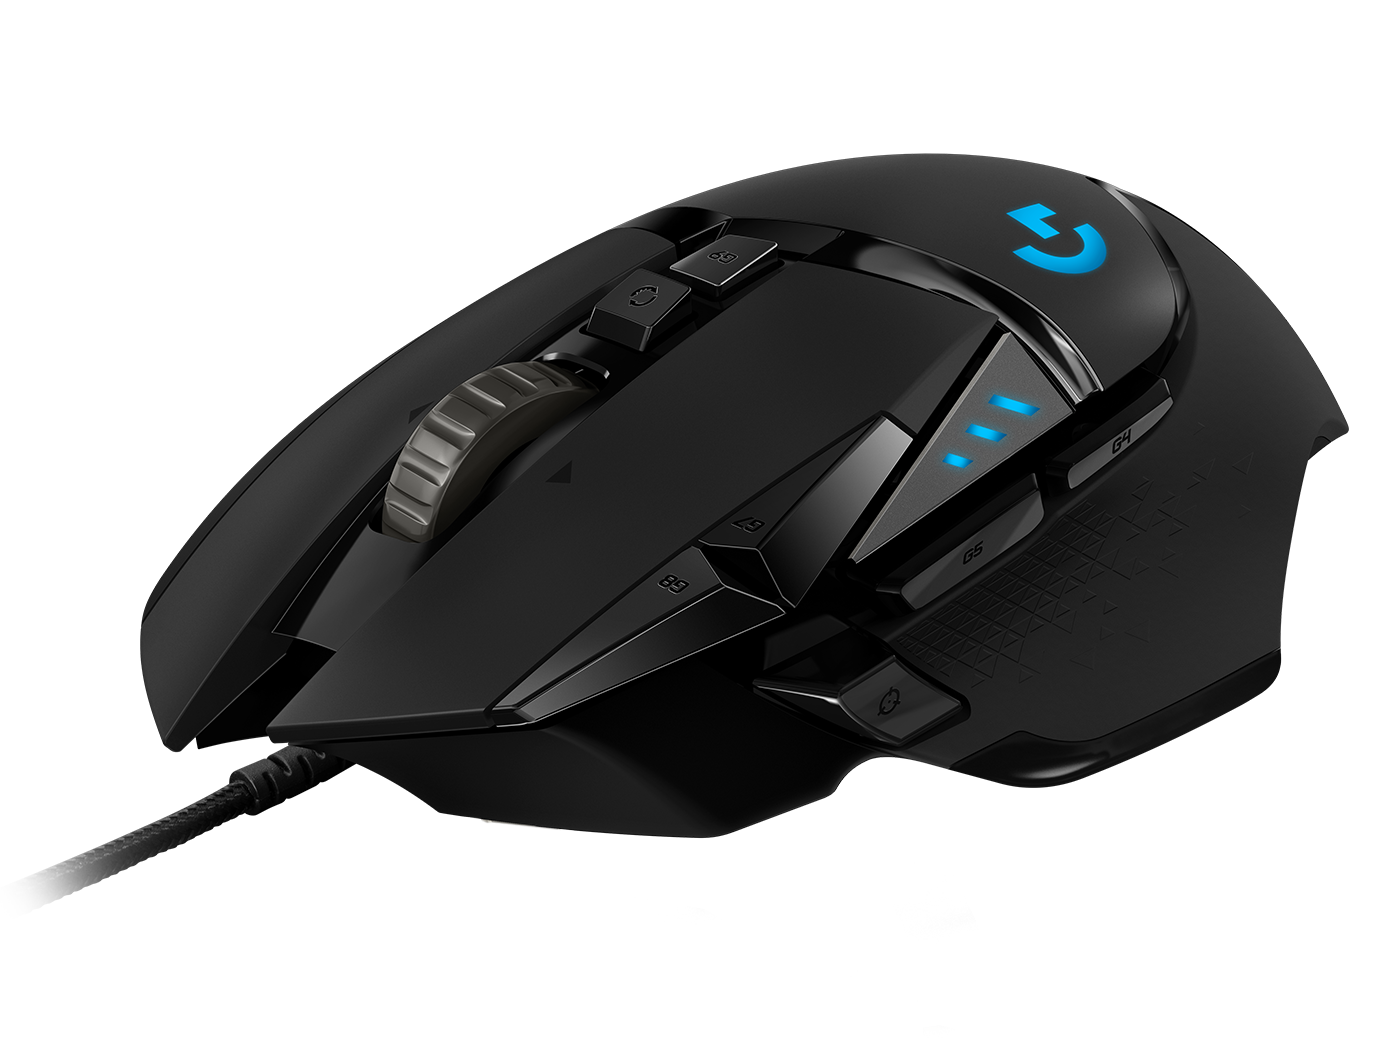 G502 gaming mouse